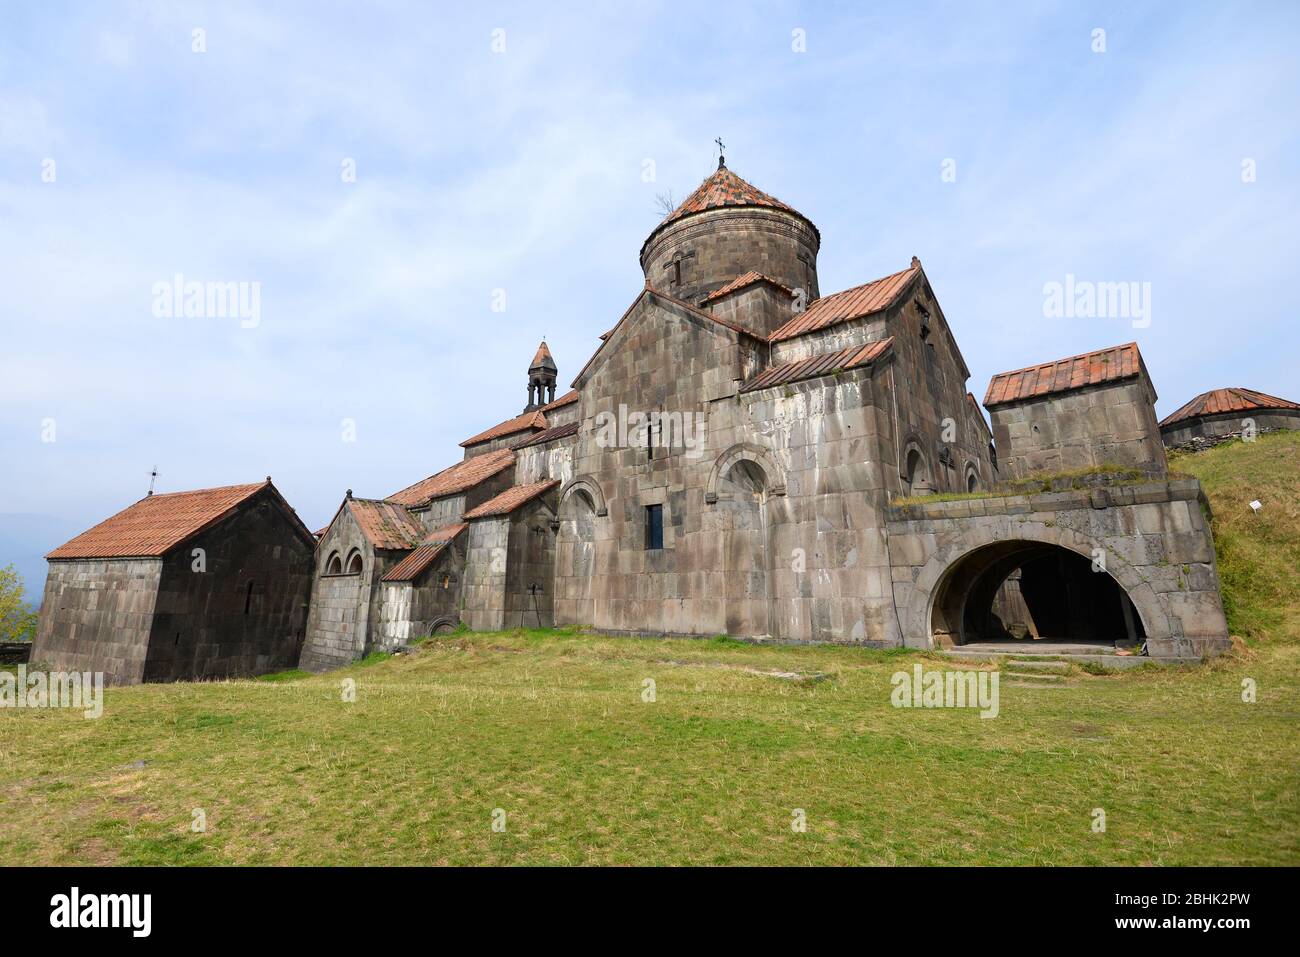 Cathedral of the Holy Sign (Surp Nshan) at the Medieval Haghpat Monastery Complex (Haghpatavank) stone built in Armenia in the Lori Province. Stock Photo